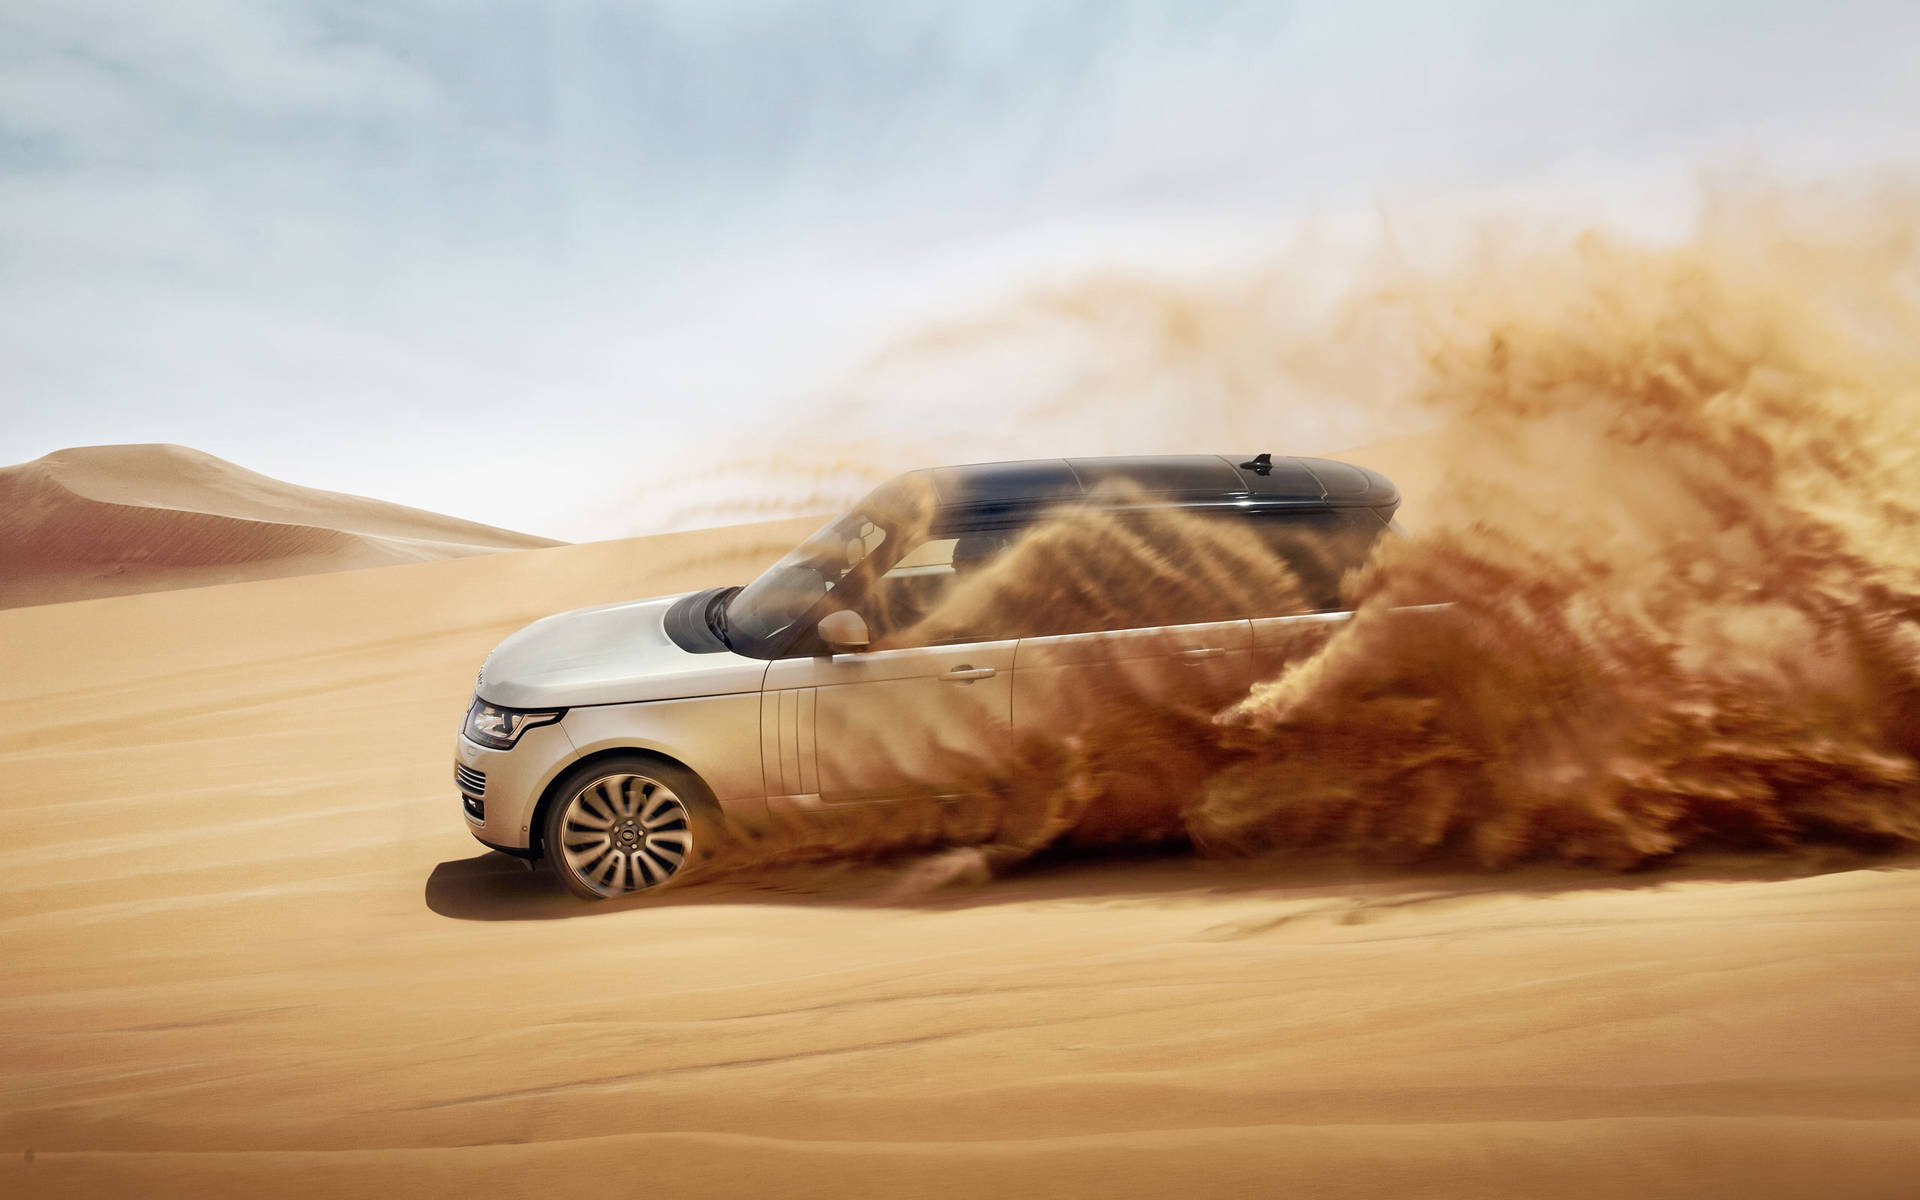 Silver Black Land Rover In Desert Picture